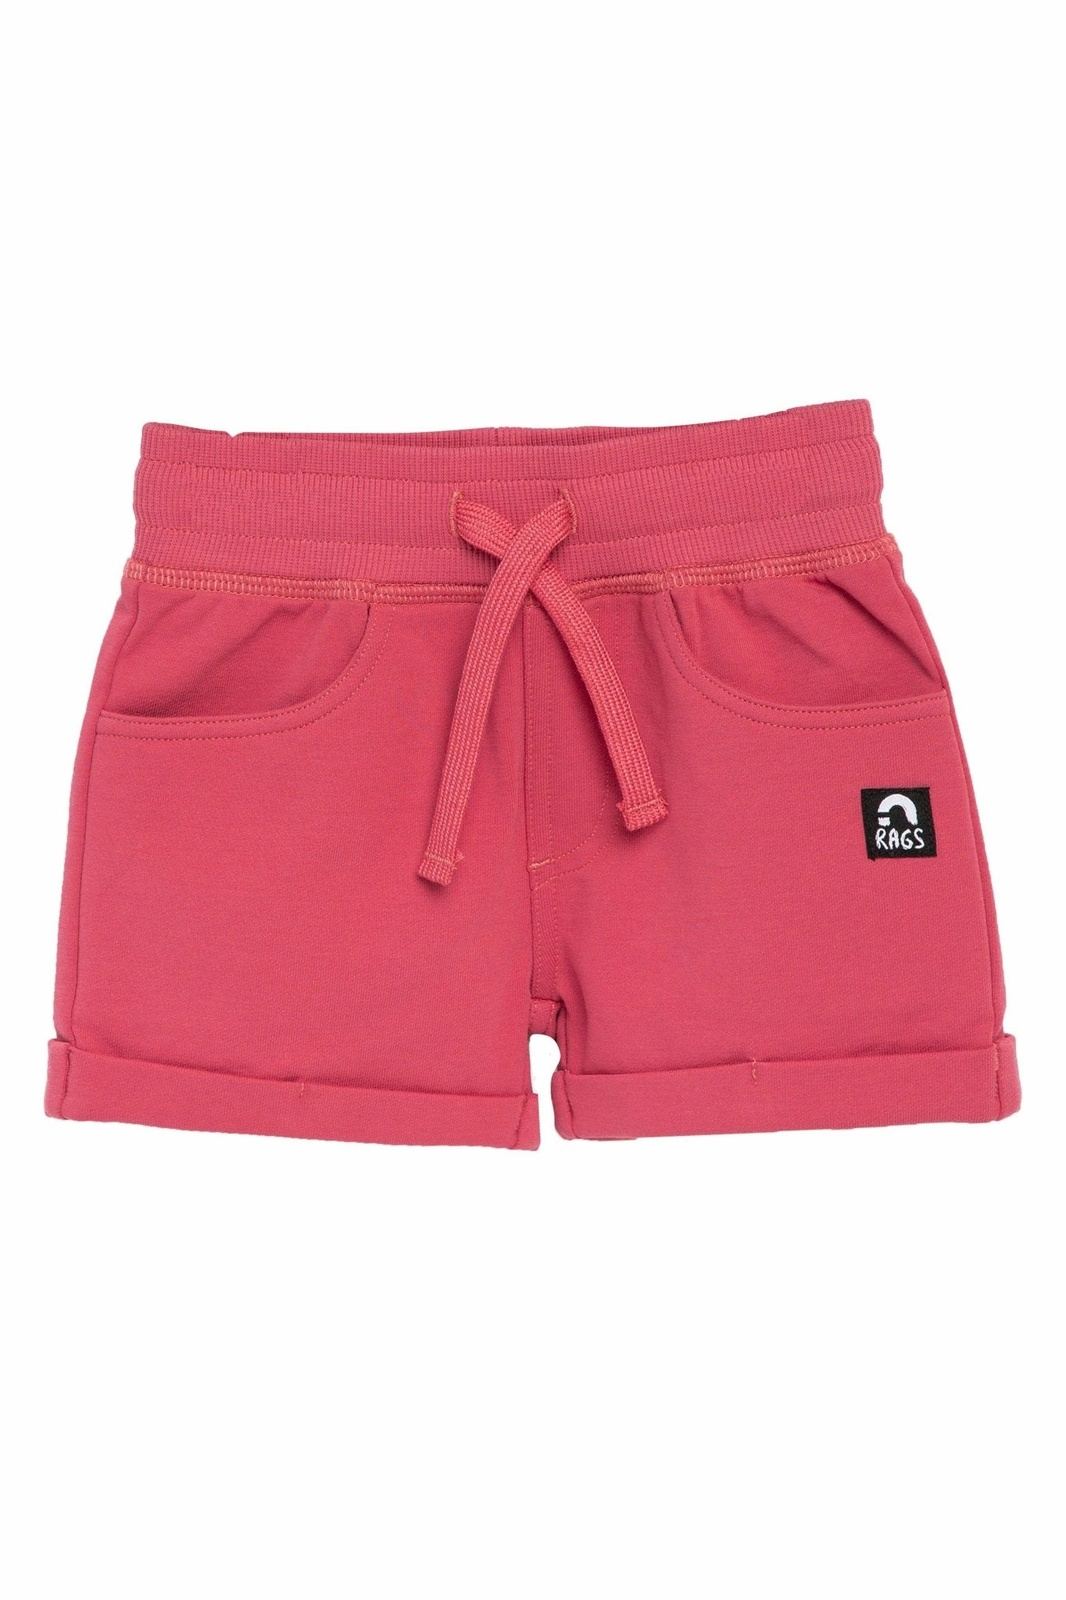 Essentials Shorts with Rolled Hem - 'Slate Rose' - Tea for Three: A Children's Boutique-New Arrivals-Tea for Three: A Children's Boutique